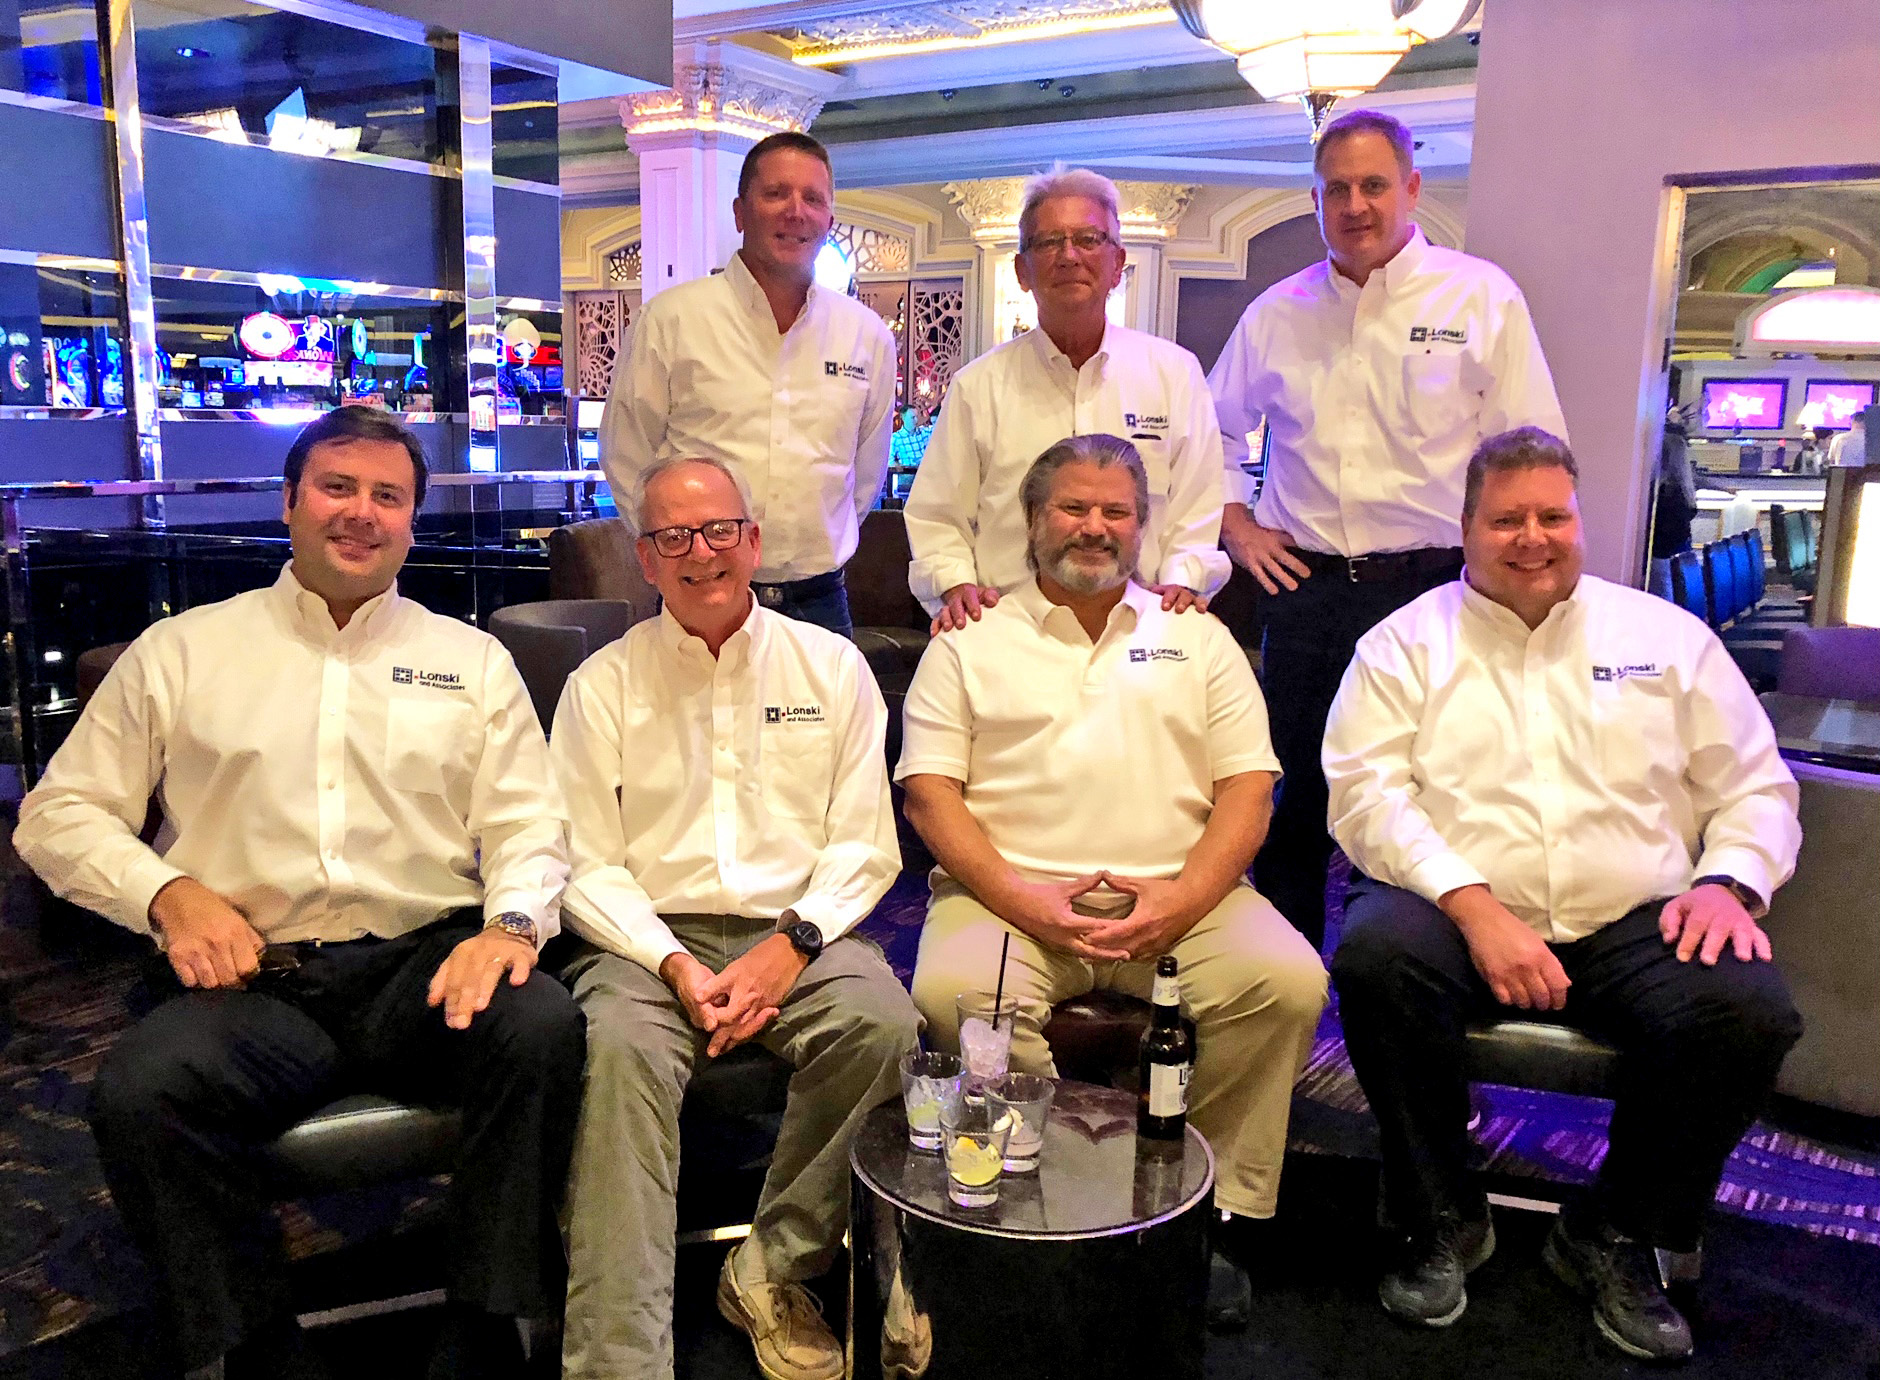 190918 Industry Staffing Experts, Lonski and Associates LLC, to Attend 2019 AIMExpo - Lonski Vegas Team Photo